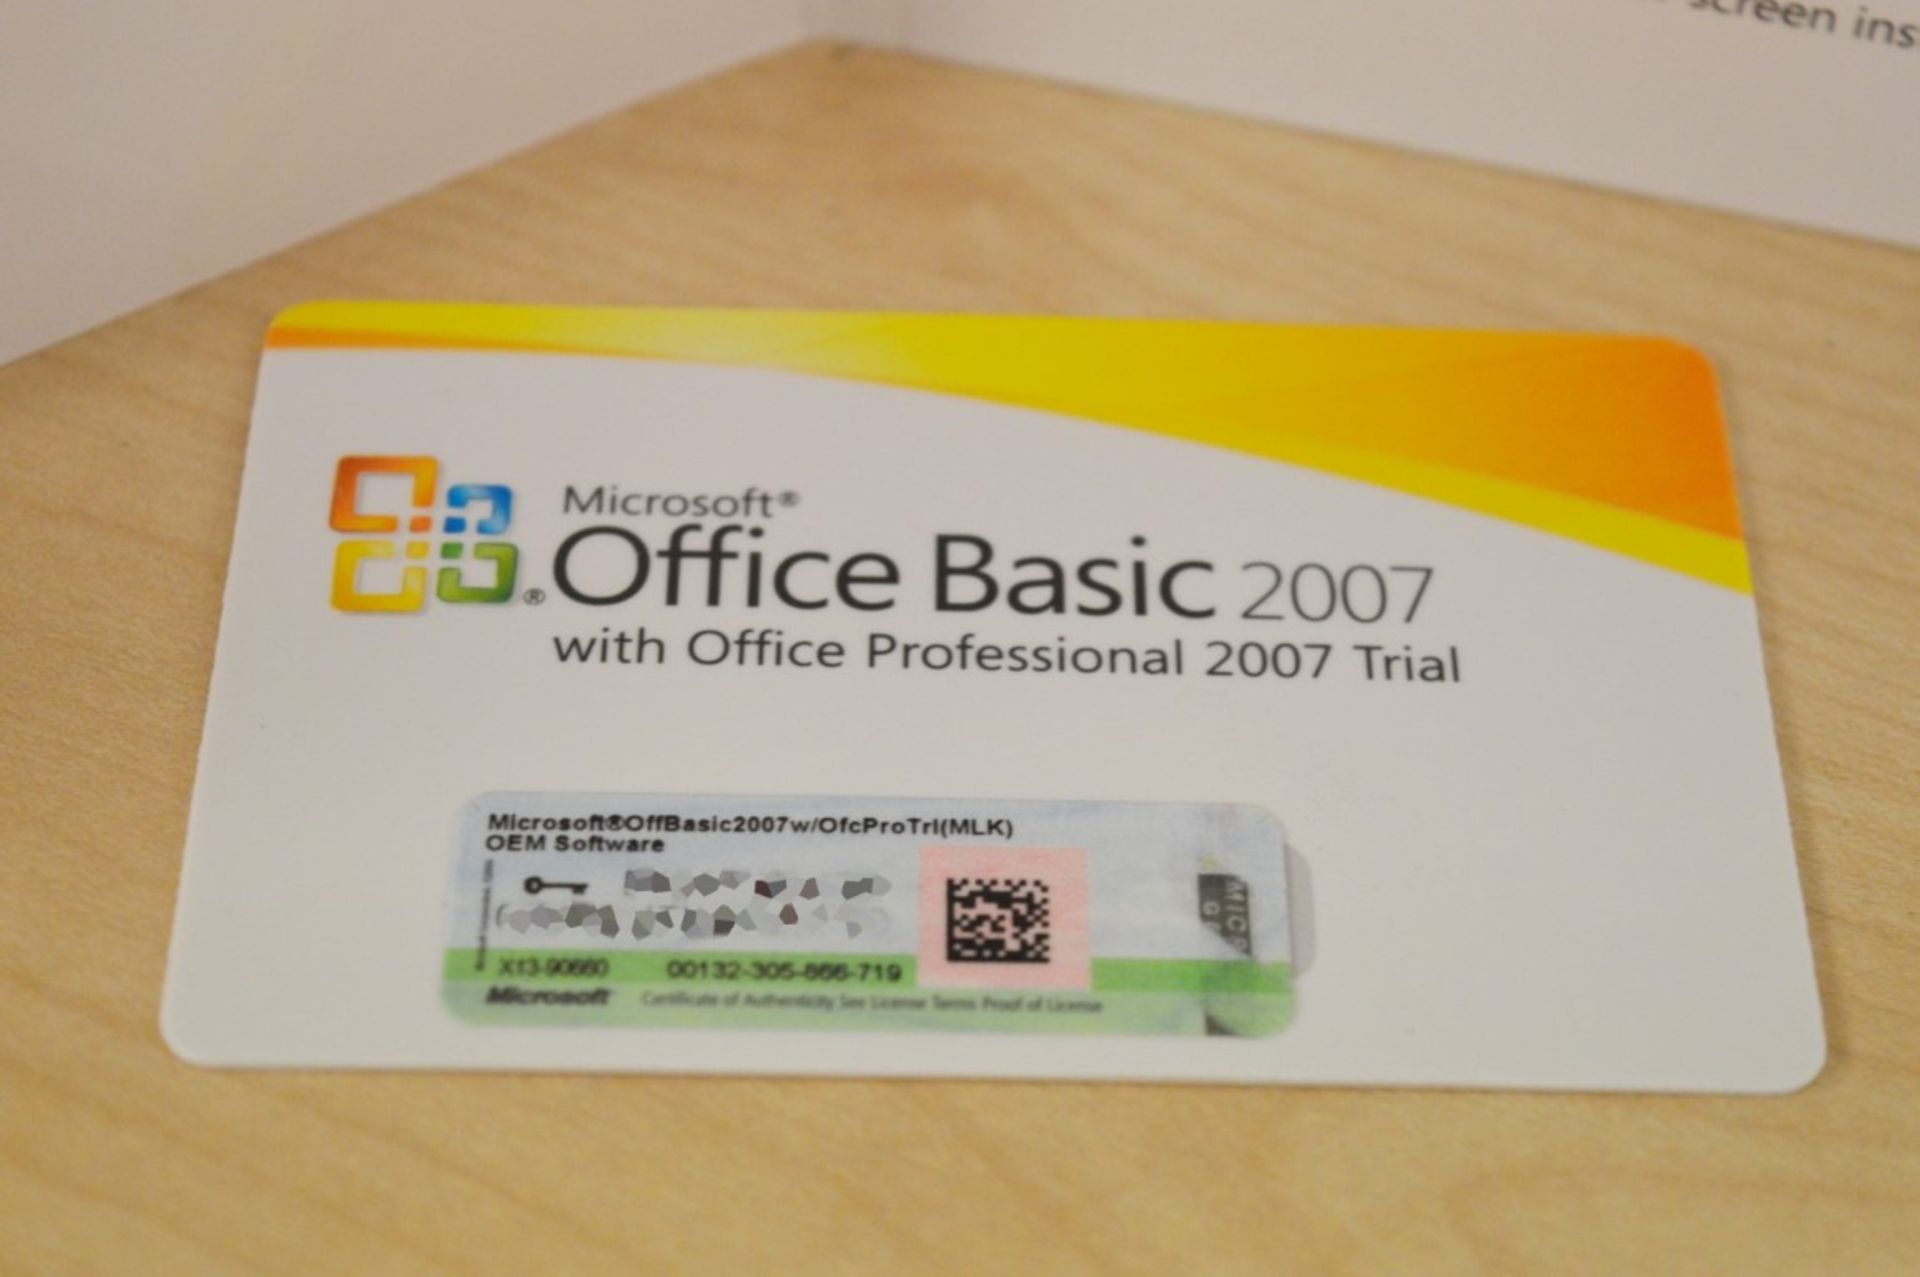 1 x Microsoft Office 2007 Basic COA - Features Word, Excel and Outlook - CL300 - Location: - Image 2 of 2